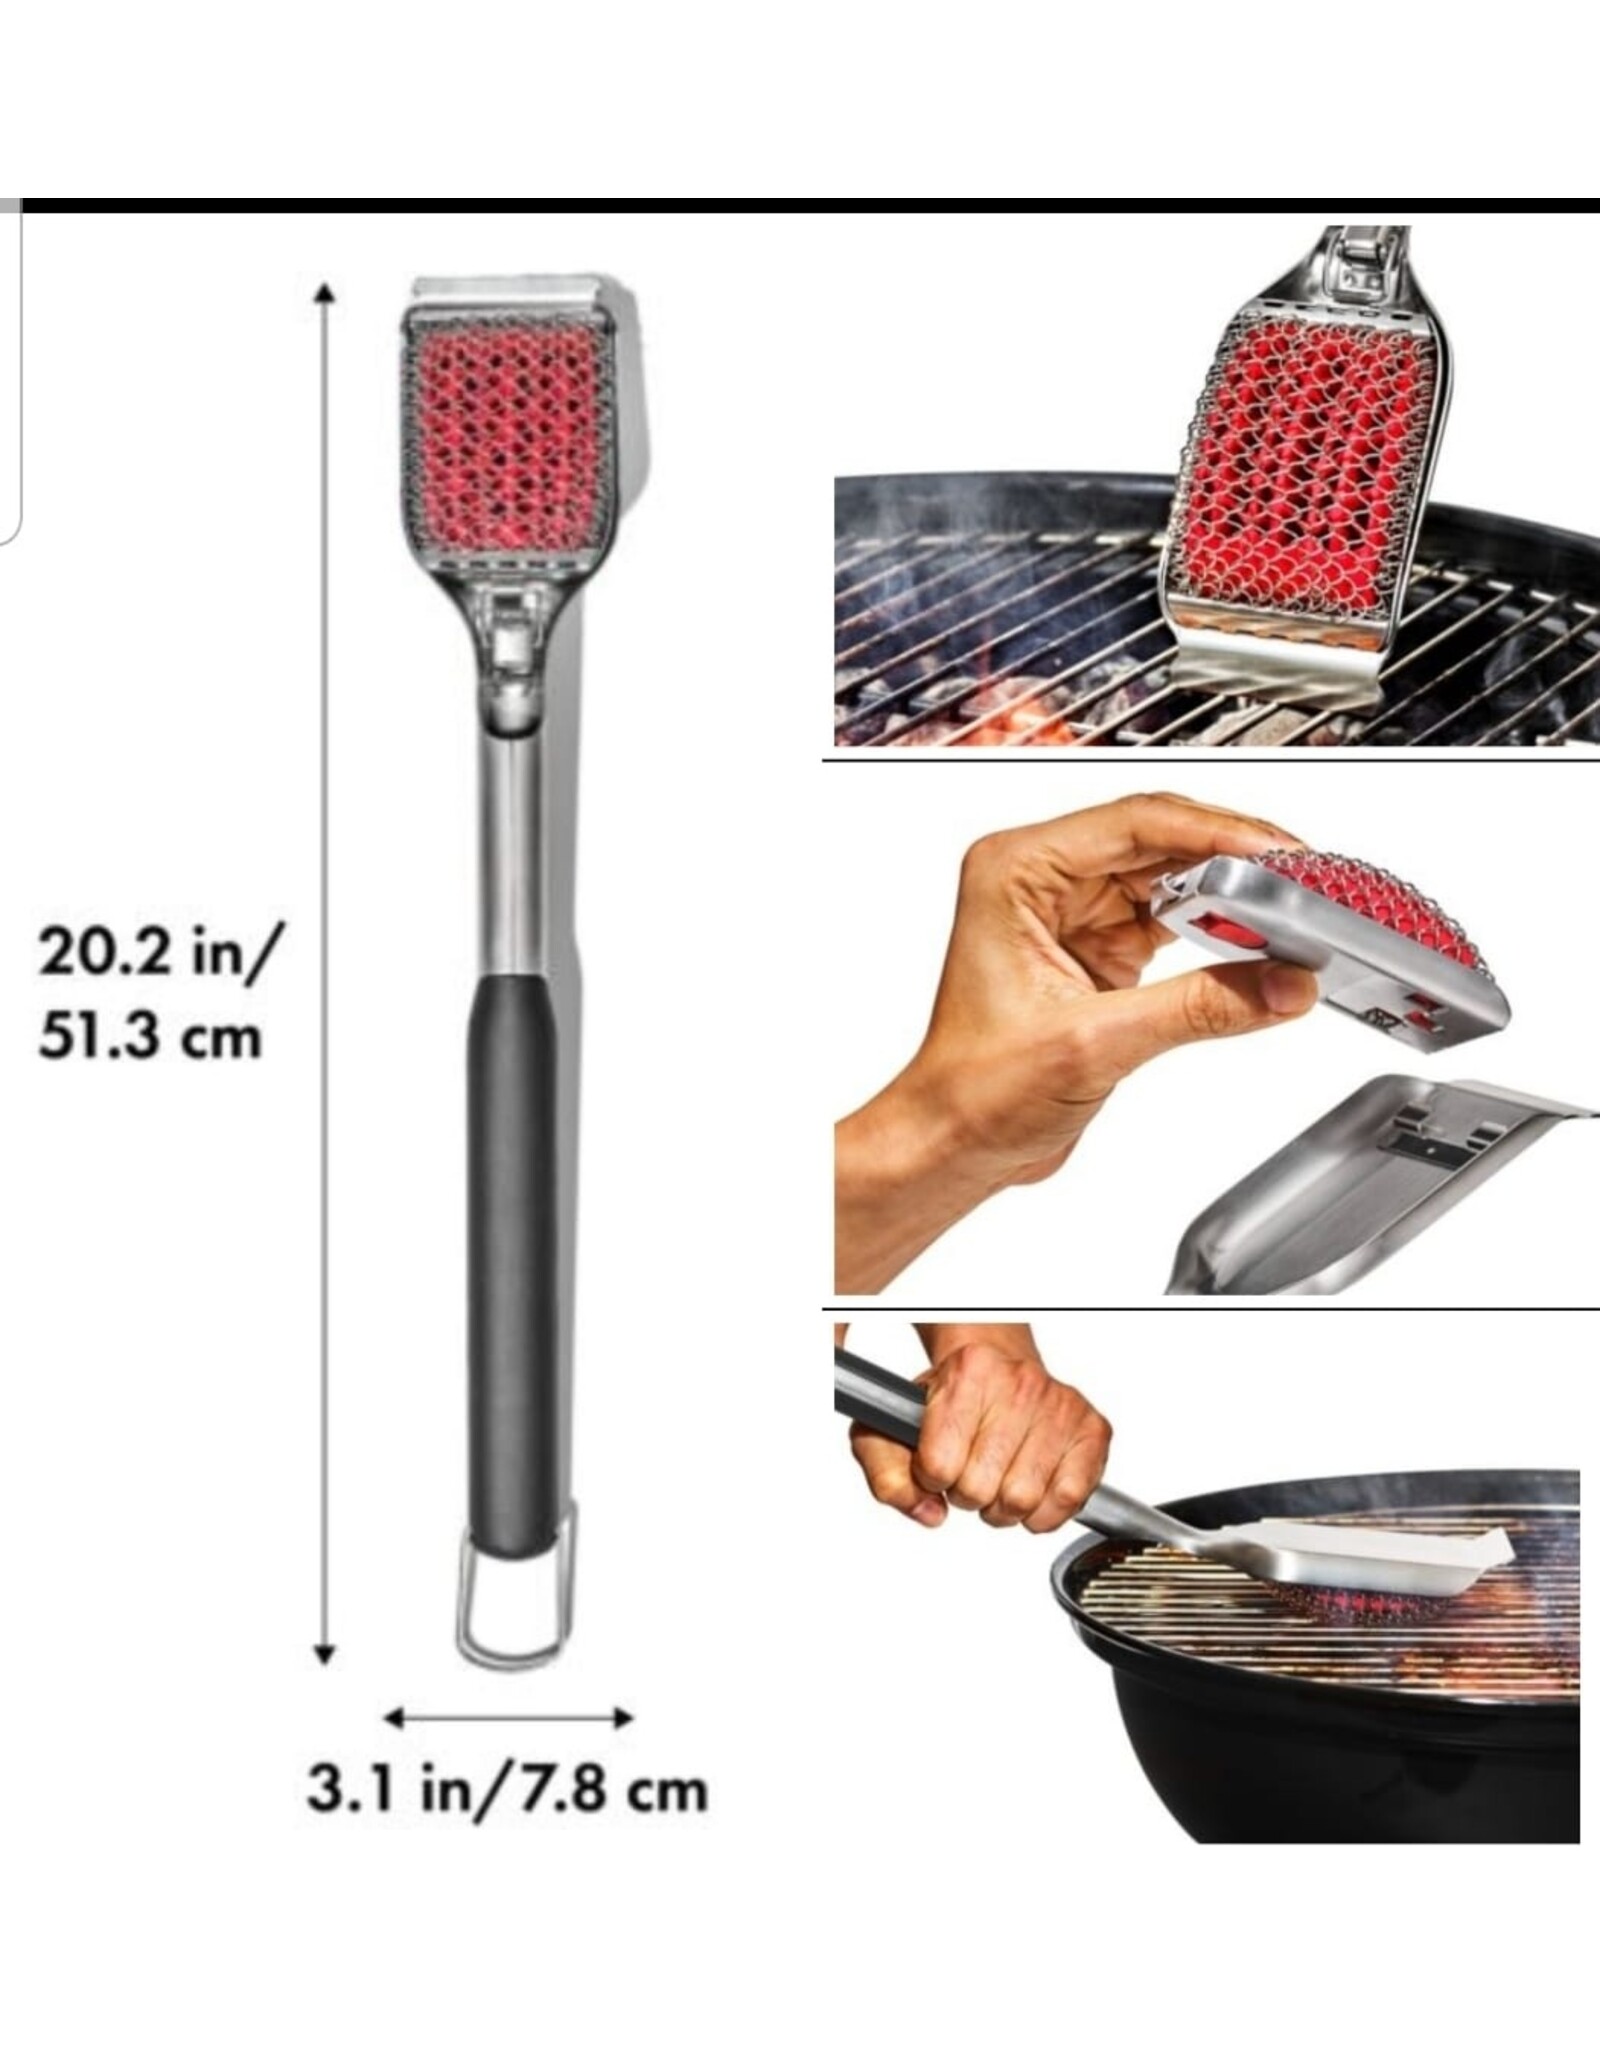 https://cdn.shoplightspeed.com/shops/635781/files/55726390/1600x2048x2/oxo-coiled-grill-brush-with-replaceable-head.jpg